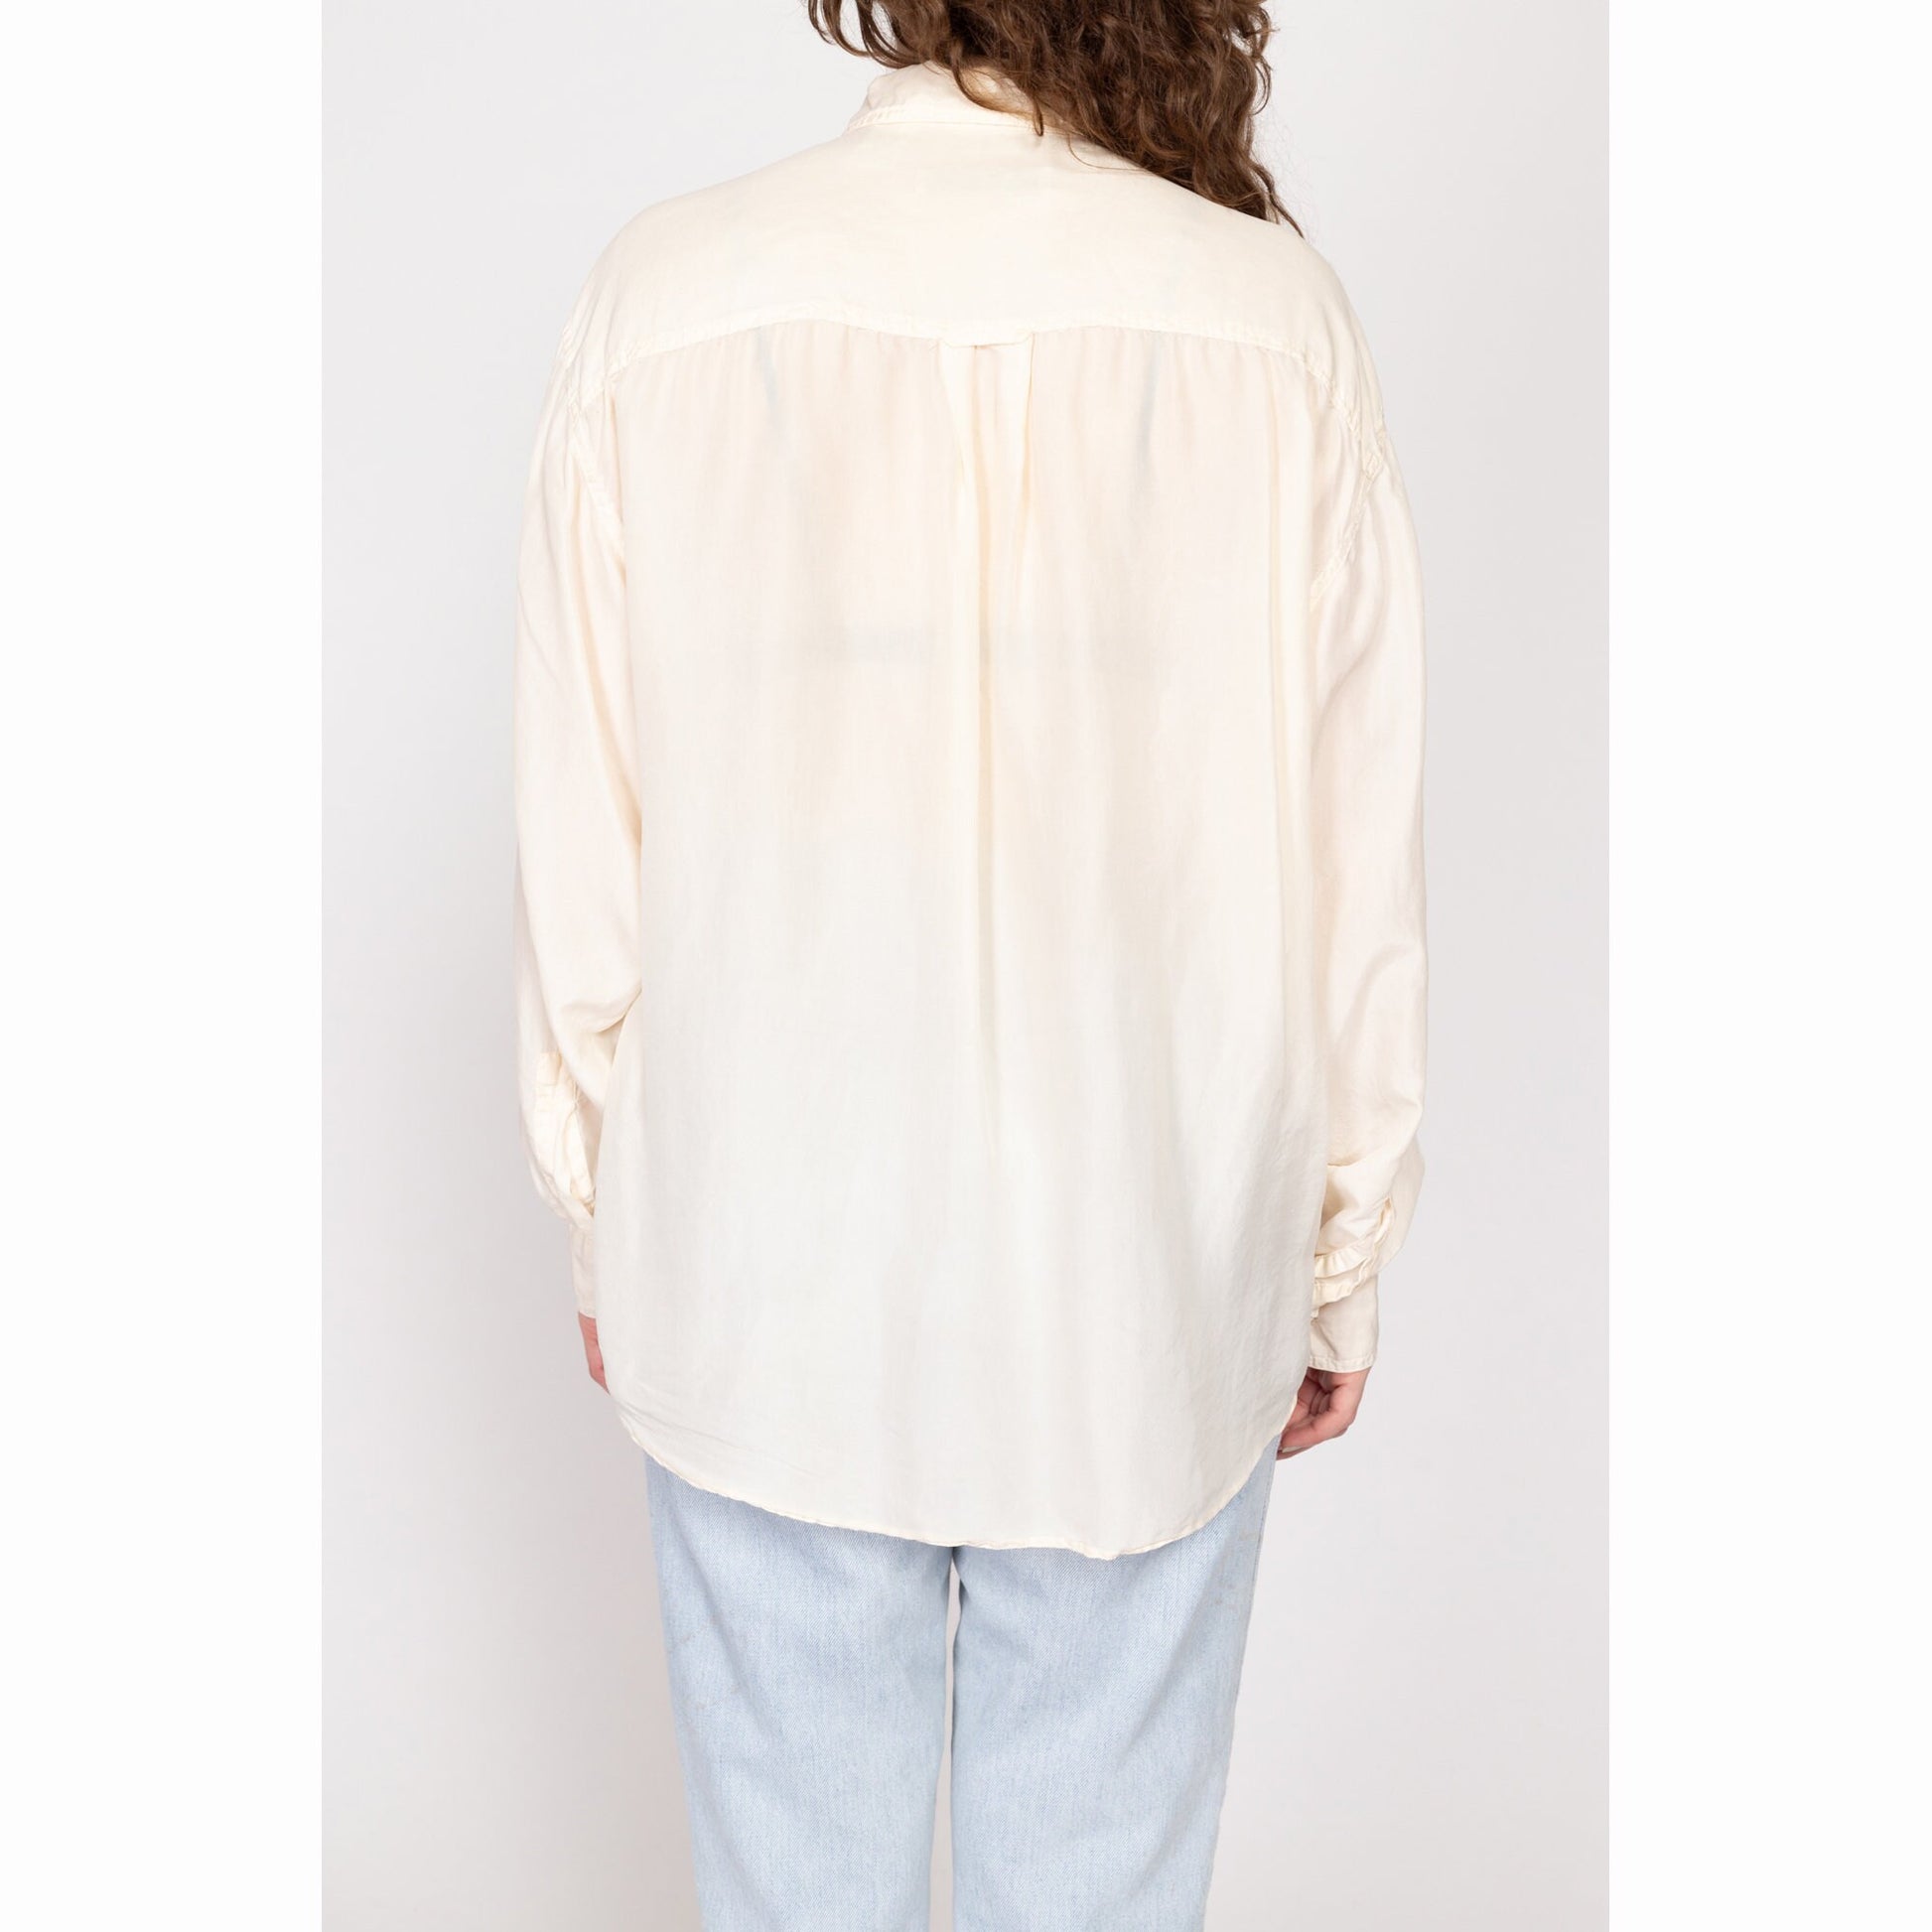 Med-XL 90s Ivory Silk Blouse | Vintage Minimalist Long Sleeve Button Up Collared Shirt